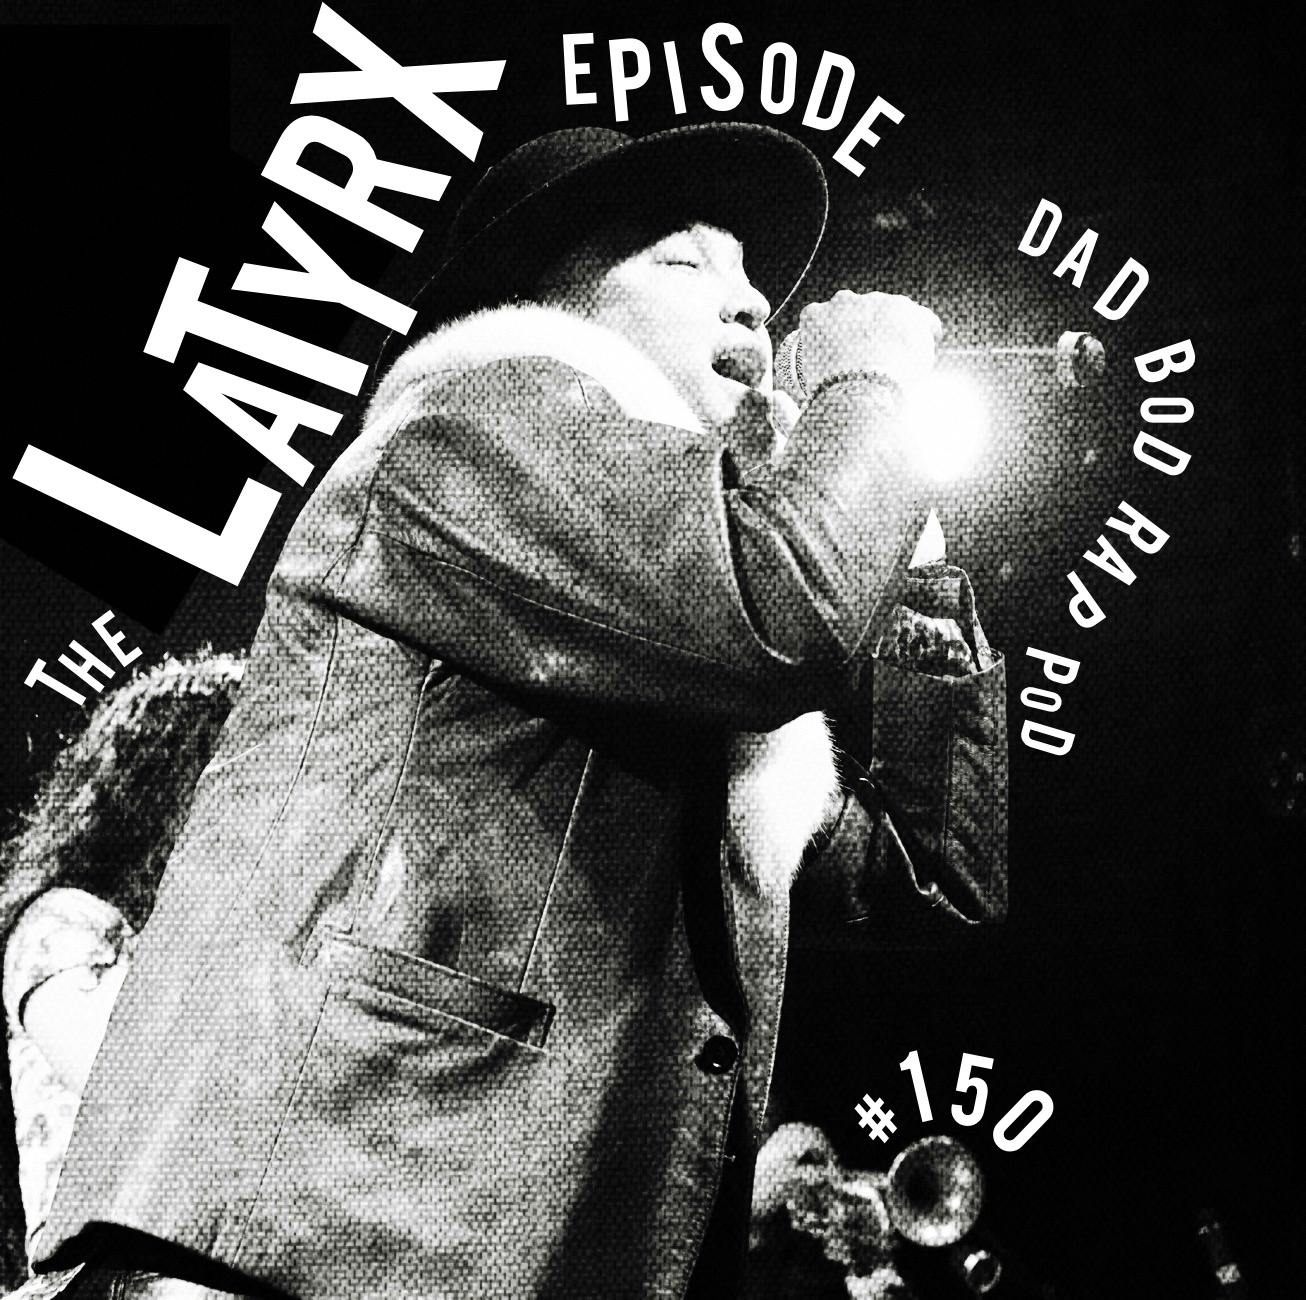 Episode 150- Latyrx The Song on The Album By The Group